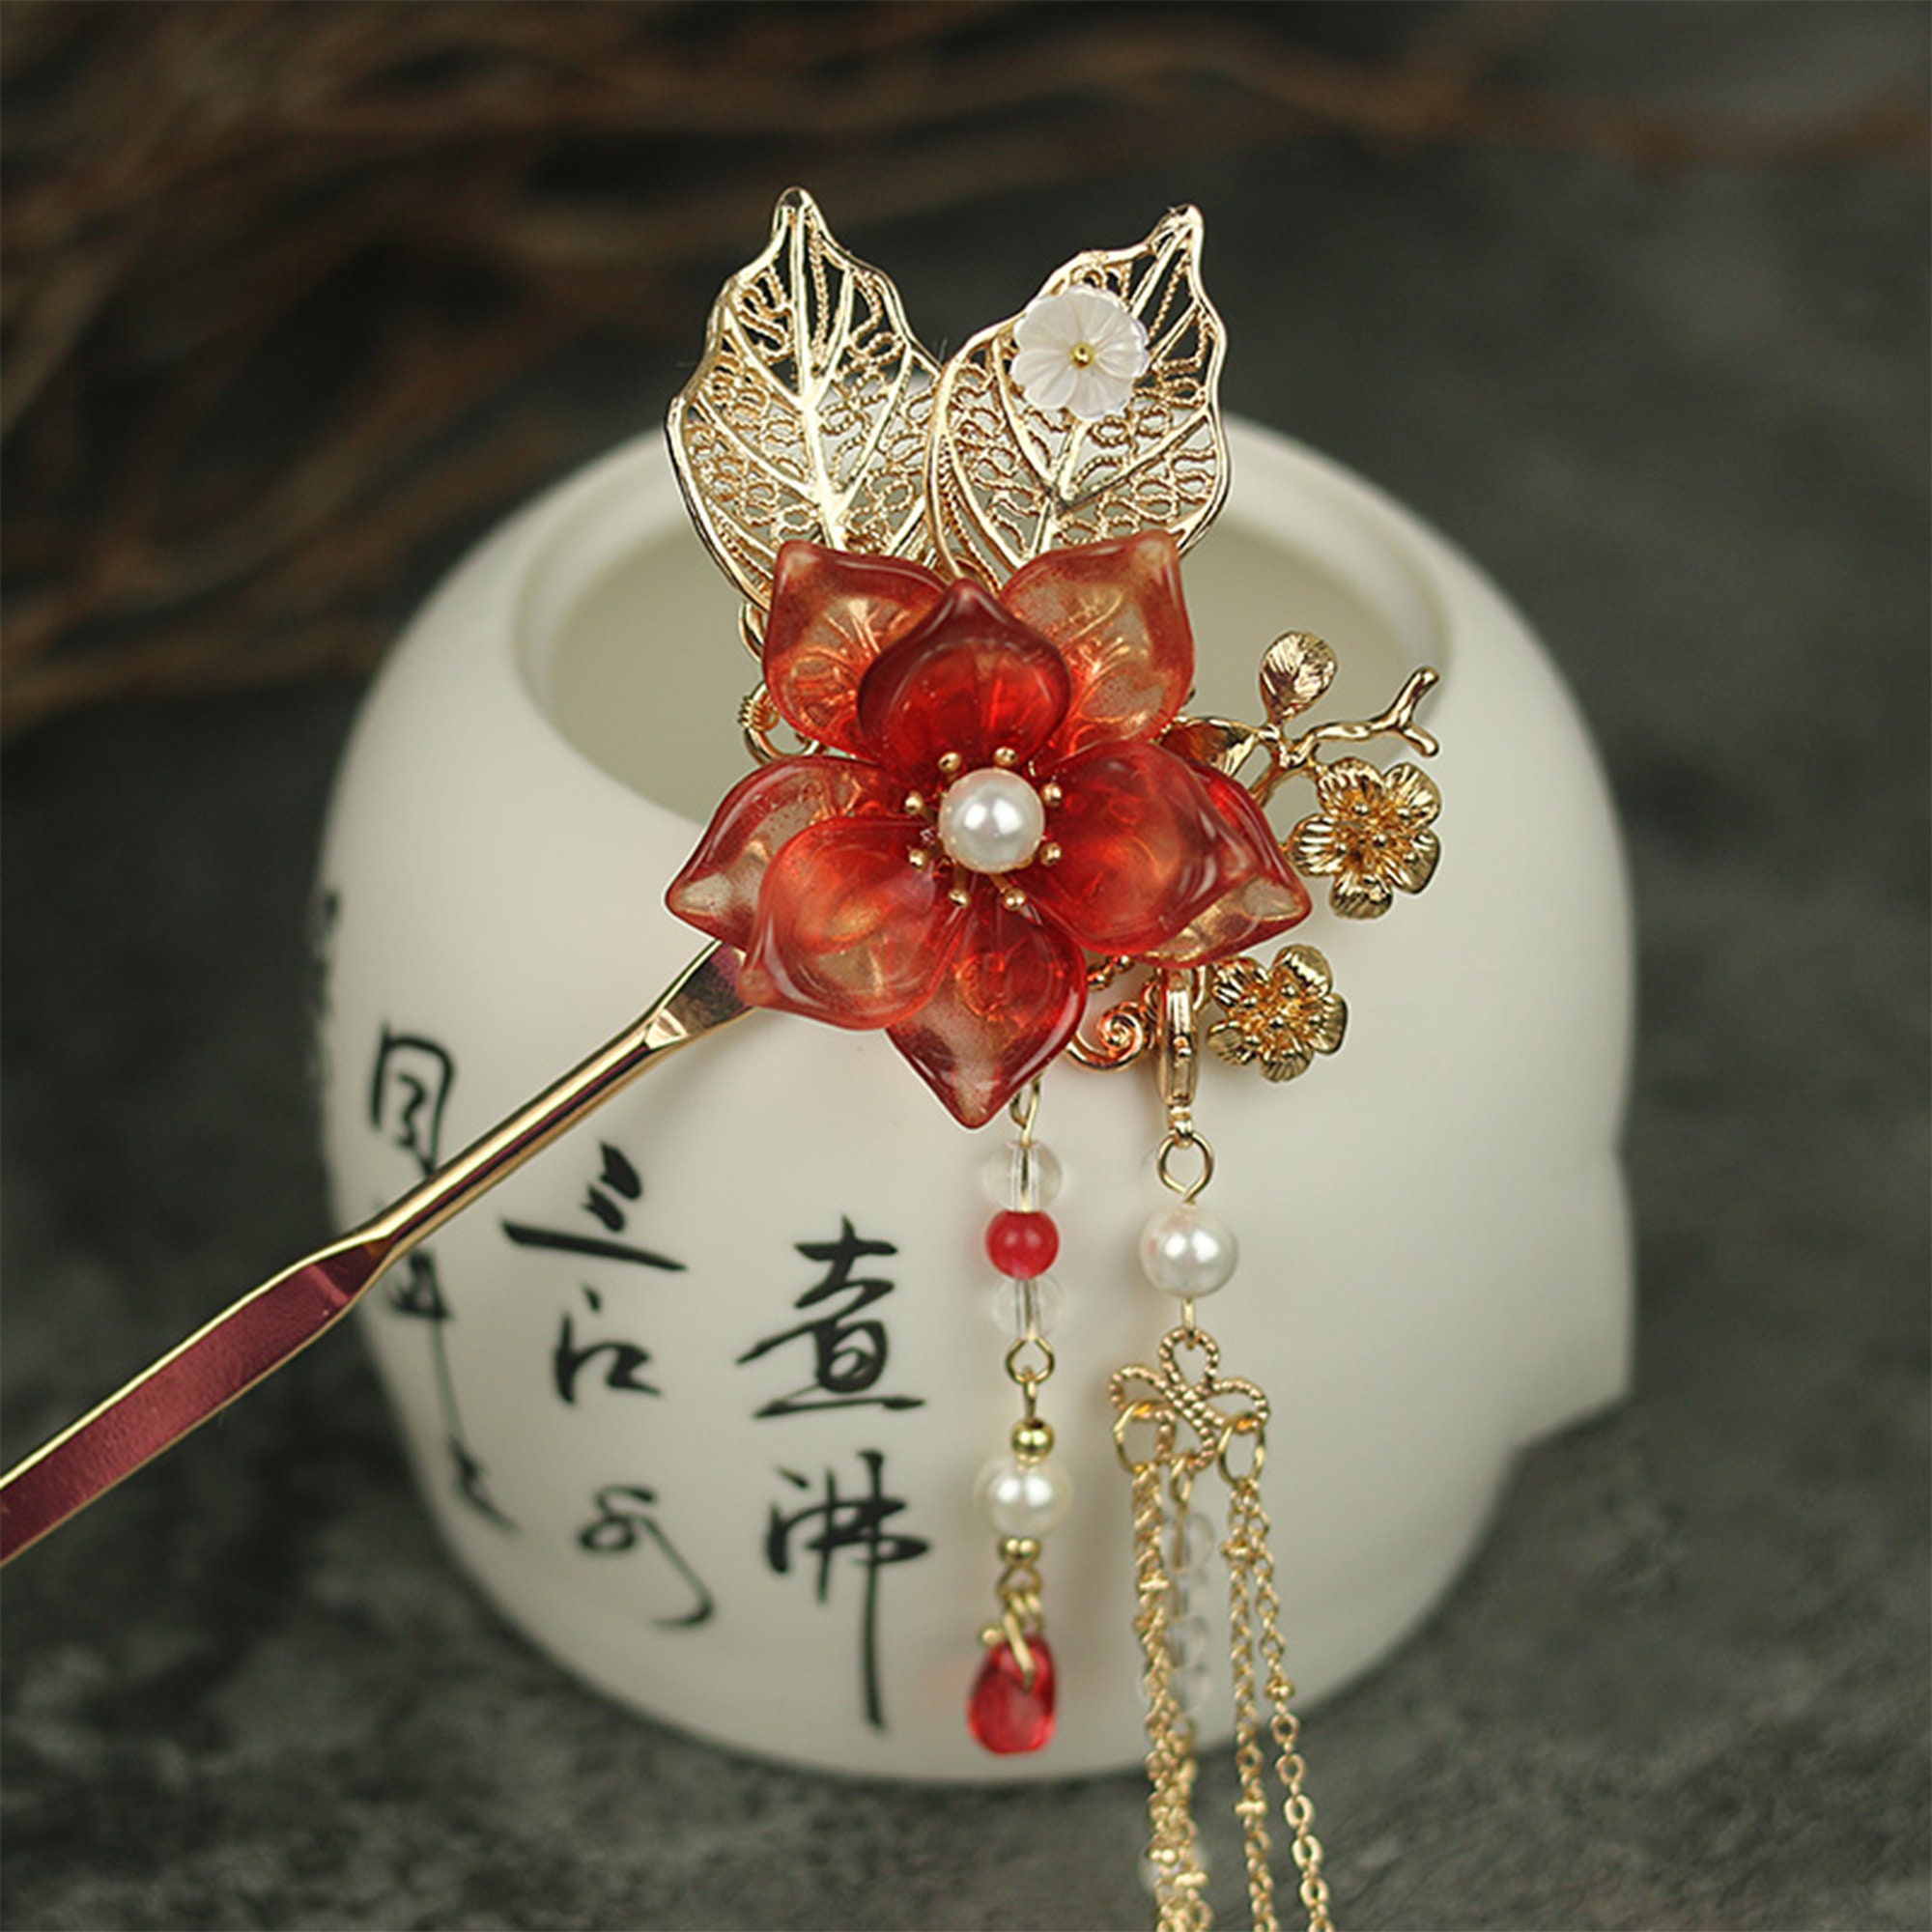 Large Red Chinese Knot Chinese Style Tassel Silk Tassel Home Decor Pendant  for Bag Purse Clothing Cultural Gift for Friend Cosplay Tool 